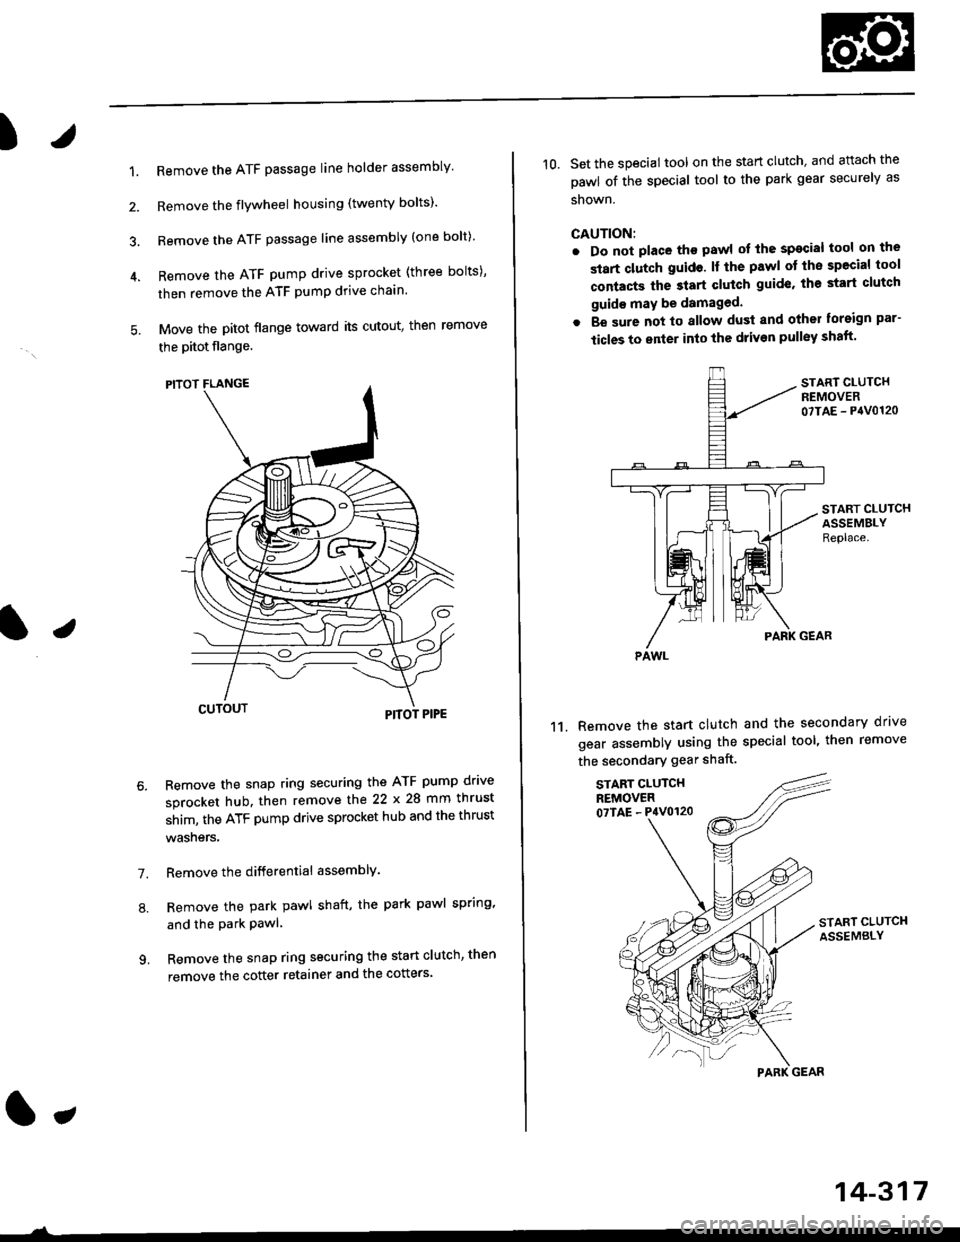 HONDA CIVIC 1997 6.G Workshop Manual )
1.Remove the ATF passage line holder assembly
Remove the flywheel housing (twenty bolts)
Remove the ATF passage line assembly (one bolt)
Remove the ATF pump drive sprocket (three bolts),
then remo